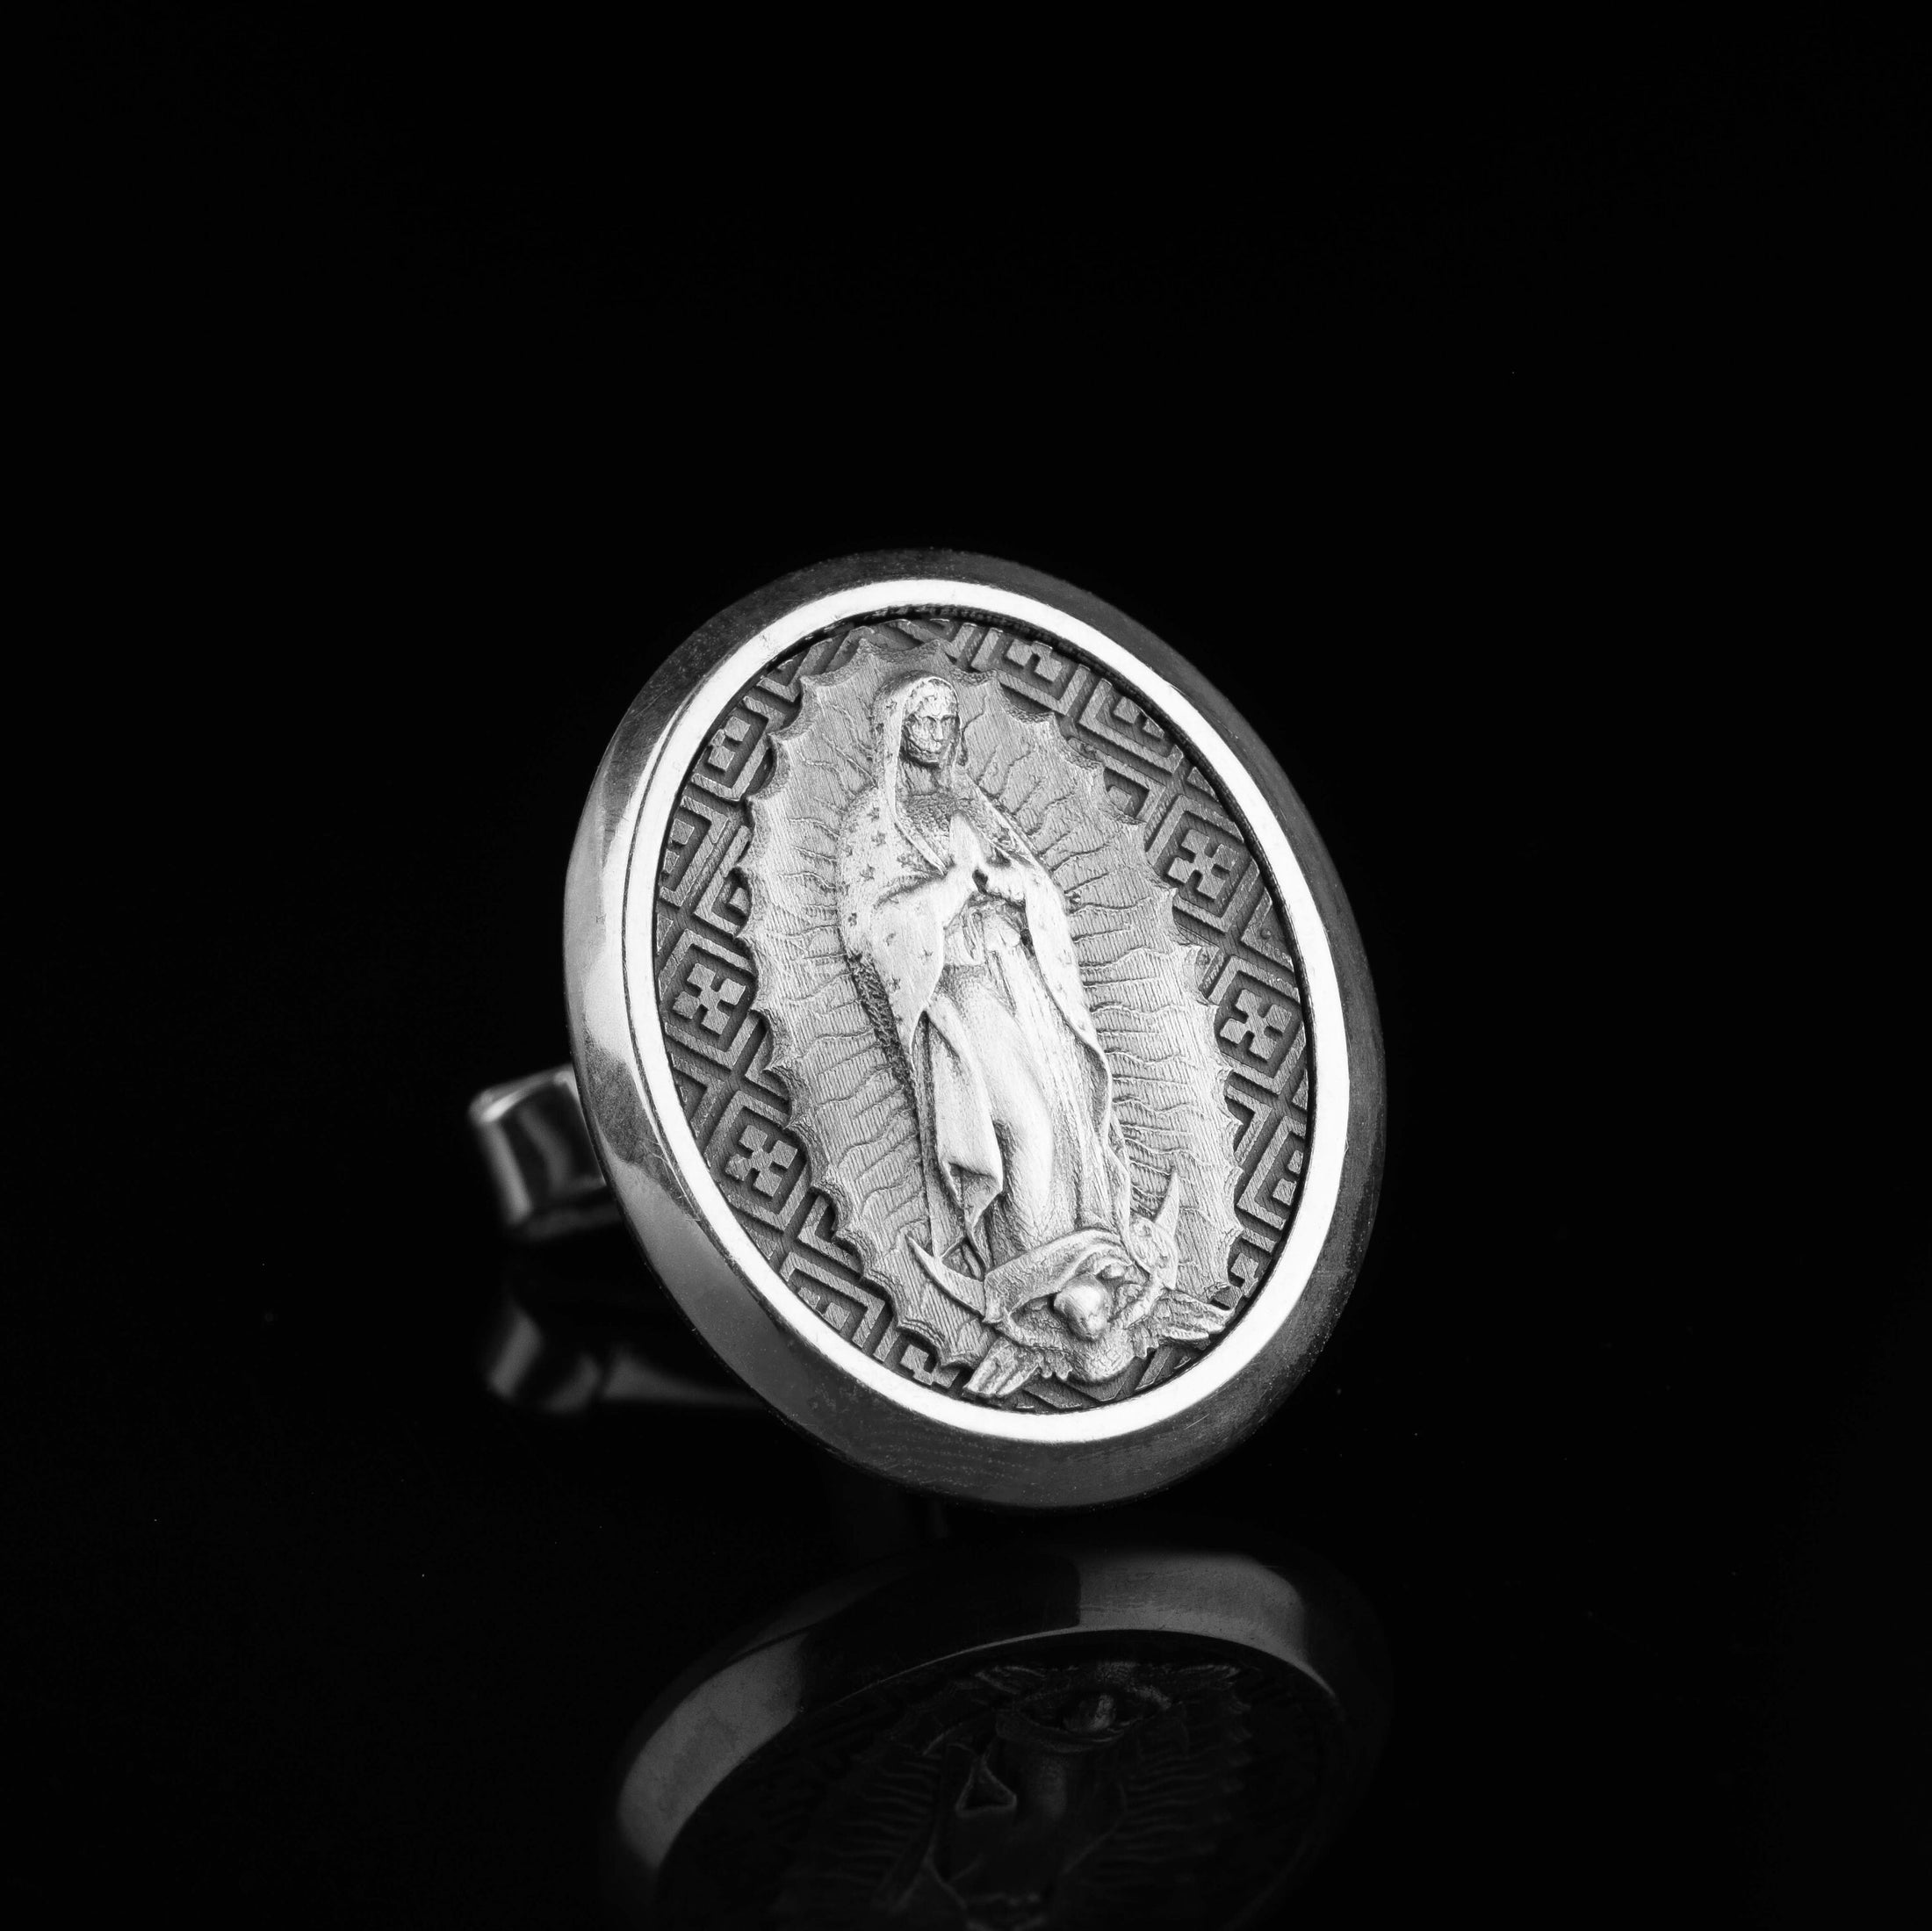 Lady Of Guadalupe Cufflinks, Virgen De Guadalupe, Virgin Mary, Memorial Gift, Catholic Cufflinks, Groomsman Gift, Religious Gift Polished Frame